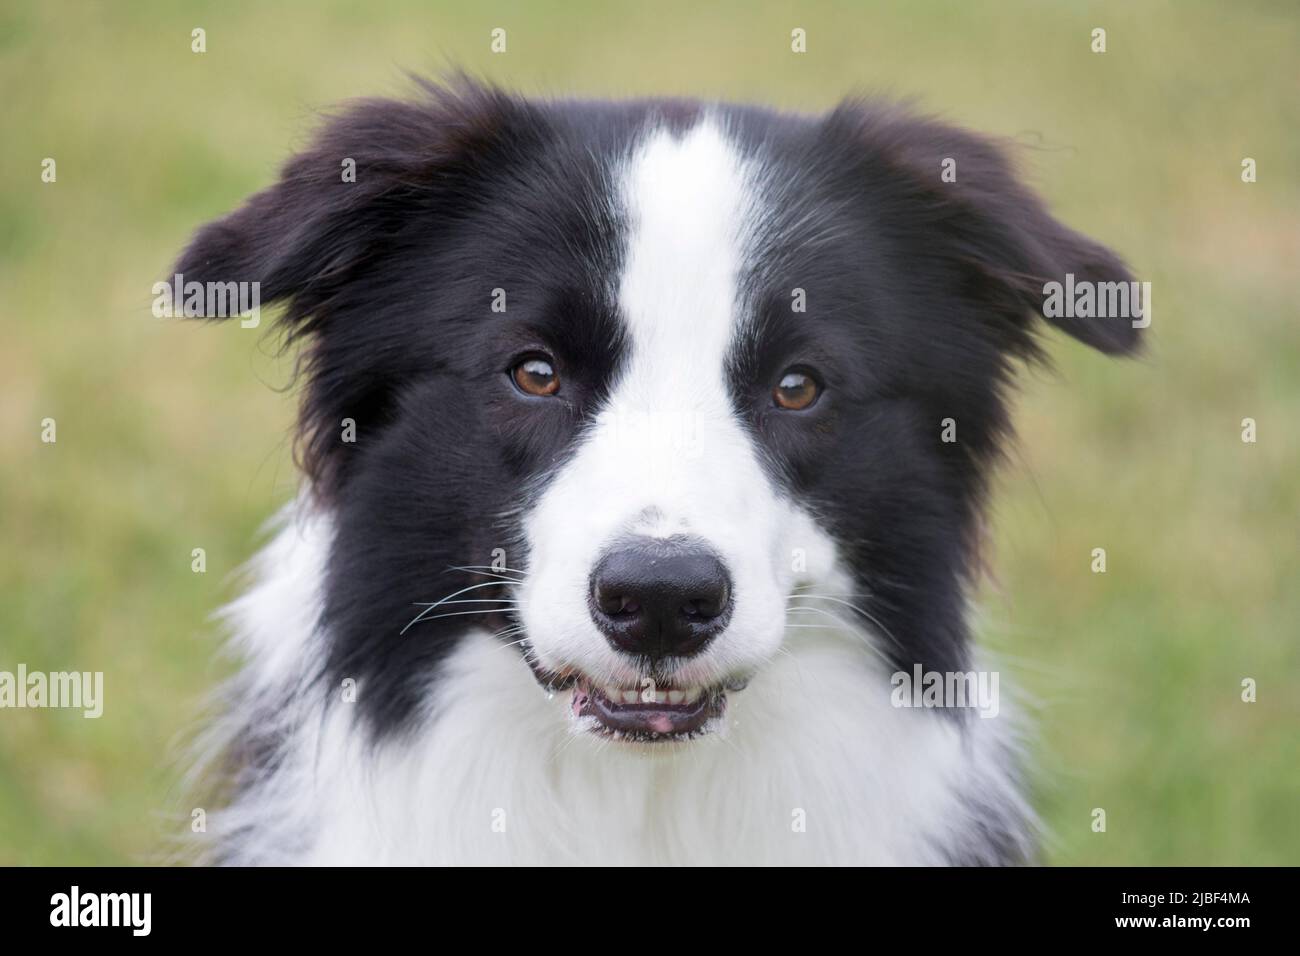 Cute border collie puppy is looking at the camera. Pet animals. Shepherd dog. Purebred dog. Stock Photo